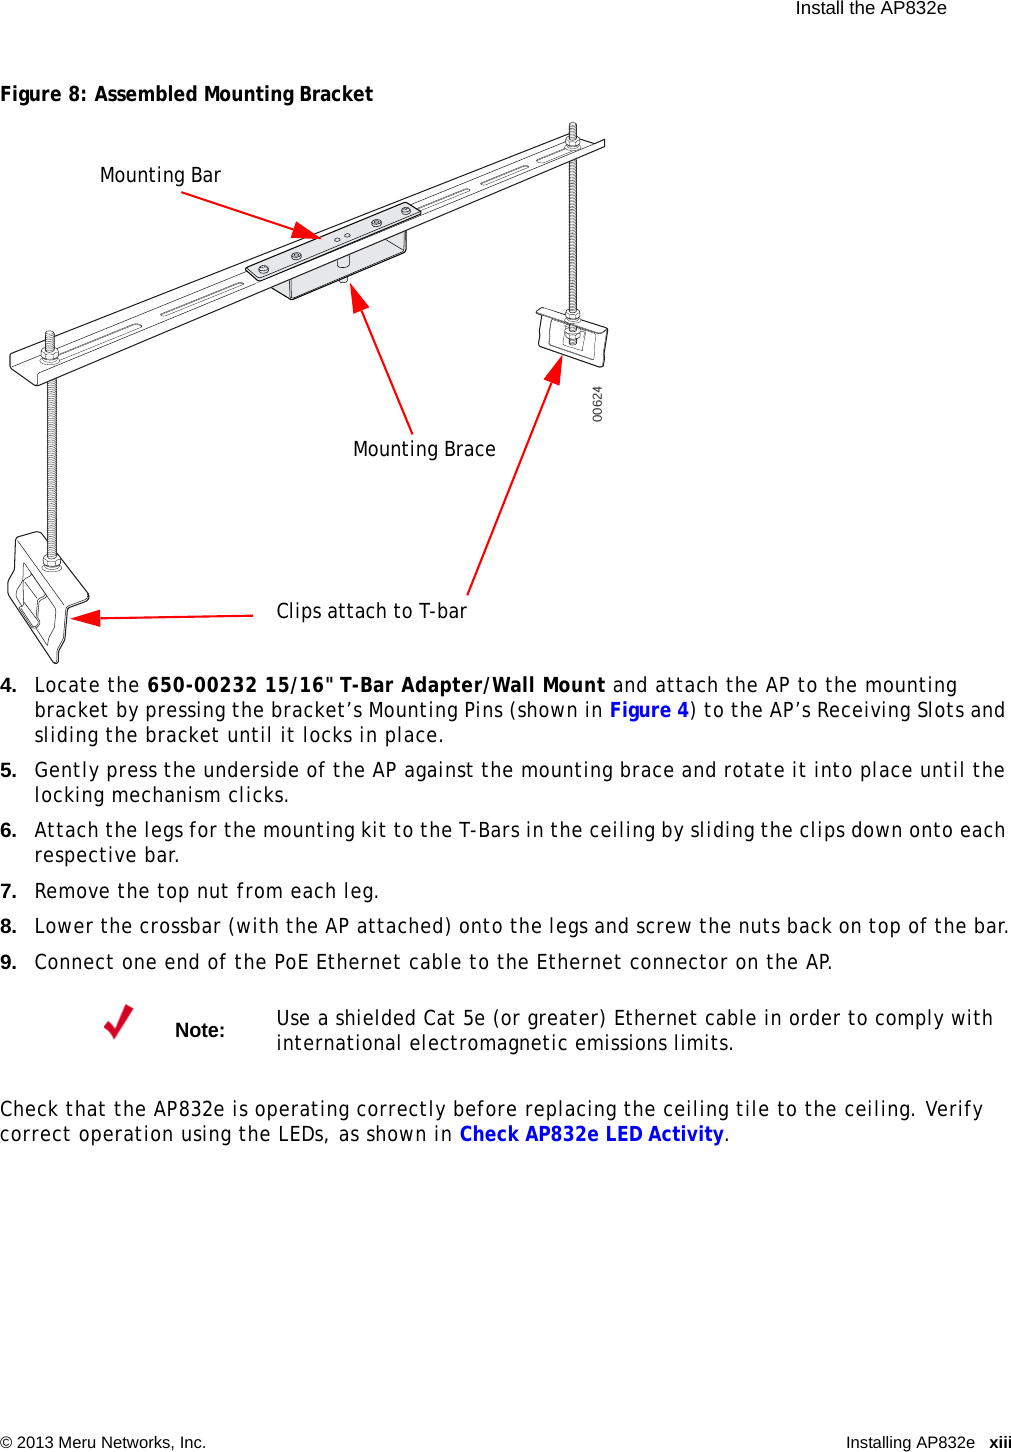  Install the AP832e © 2013 Meru Networks, Inc. Installing AP832e xiii Figure 8: Assembled Mounting Bracket4. Locate the 650-00232 15/16&quot; T-Bar Adapter/Wall Mount and attach the AP to the mounting bracket by pressing the bracket’s Mounting Pins (shown in Figure 4) to the AP’s Receiving Slots and sliding the bracket until it locks in place.5. Gently press the underside of the AP against the mounting brace and rotate it into place until the locking mechanism clicks.6. Attach the legs for the mounting kit to the T-Bars in the ceiling by sliding the clips down onto each respective bar.7. Remove the top nut from each leg.8. Lower the crossbar (with the AP attached) onto the legs and screw the nuts back on top of the bar.9. Connect one end of the PoE Ethernet cable to the Ethernet connector on the AP.Check that the AP832e is operating correctly before replacing the ceiling tile to the ceiling. Verify correct operation using the LEDs, as shown in Check AP832e LED Activity.Note:Use a shielded Cat 5e (or greater) Ethernet cable in order to comply with international electromagnetic emissions limits.00624Mounting BraceMounting BarClips attach to T-bar